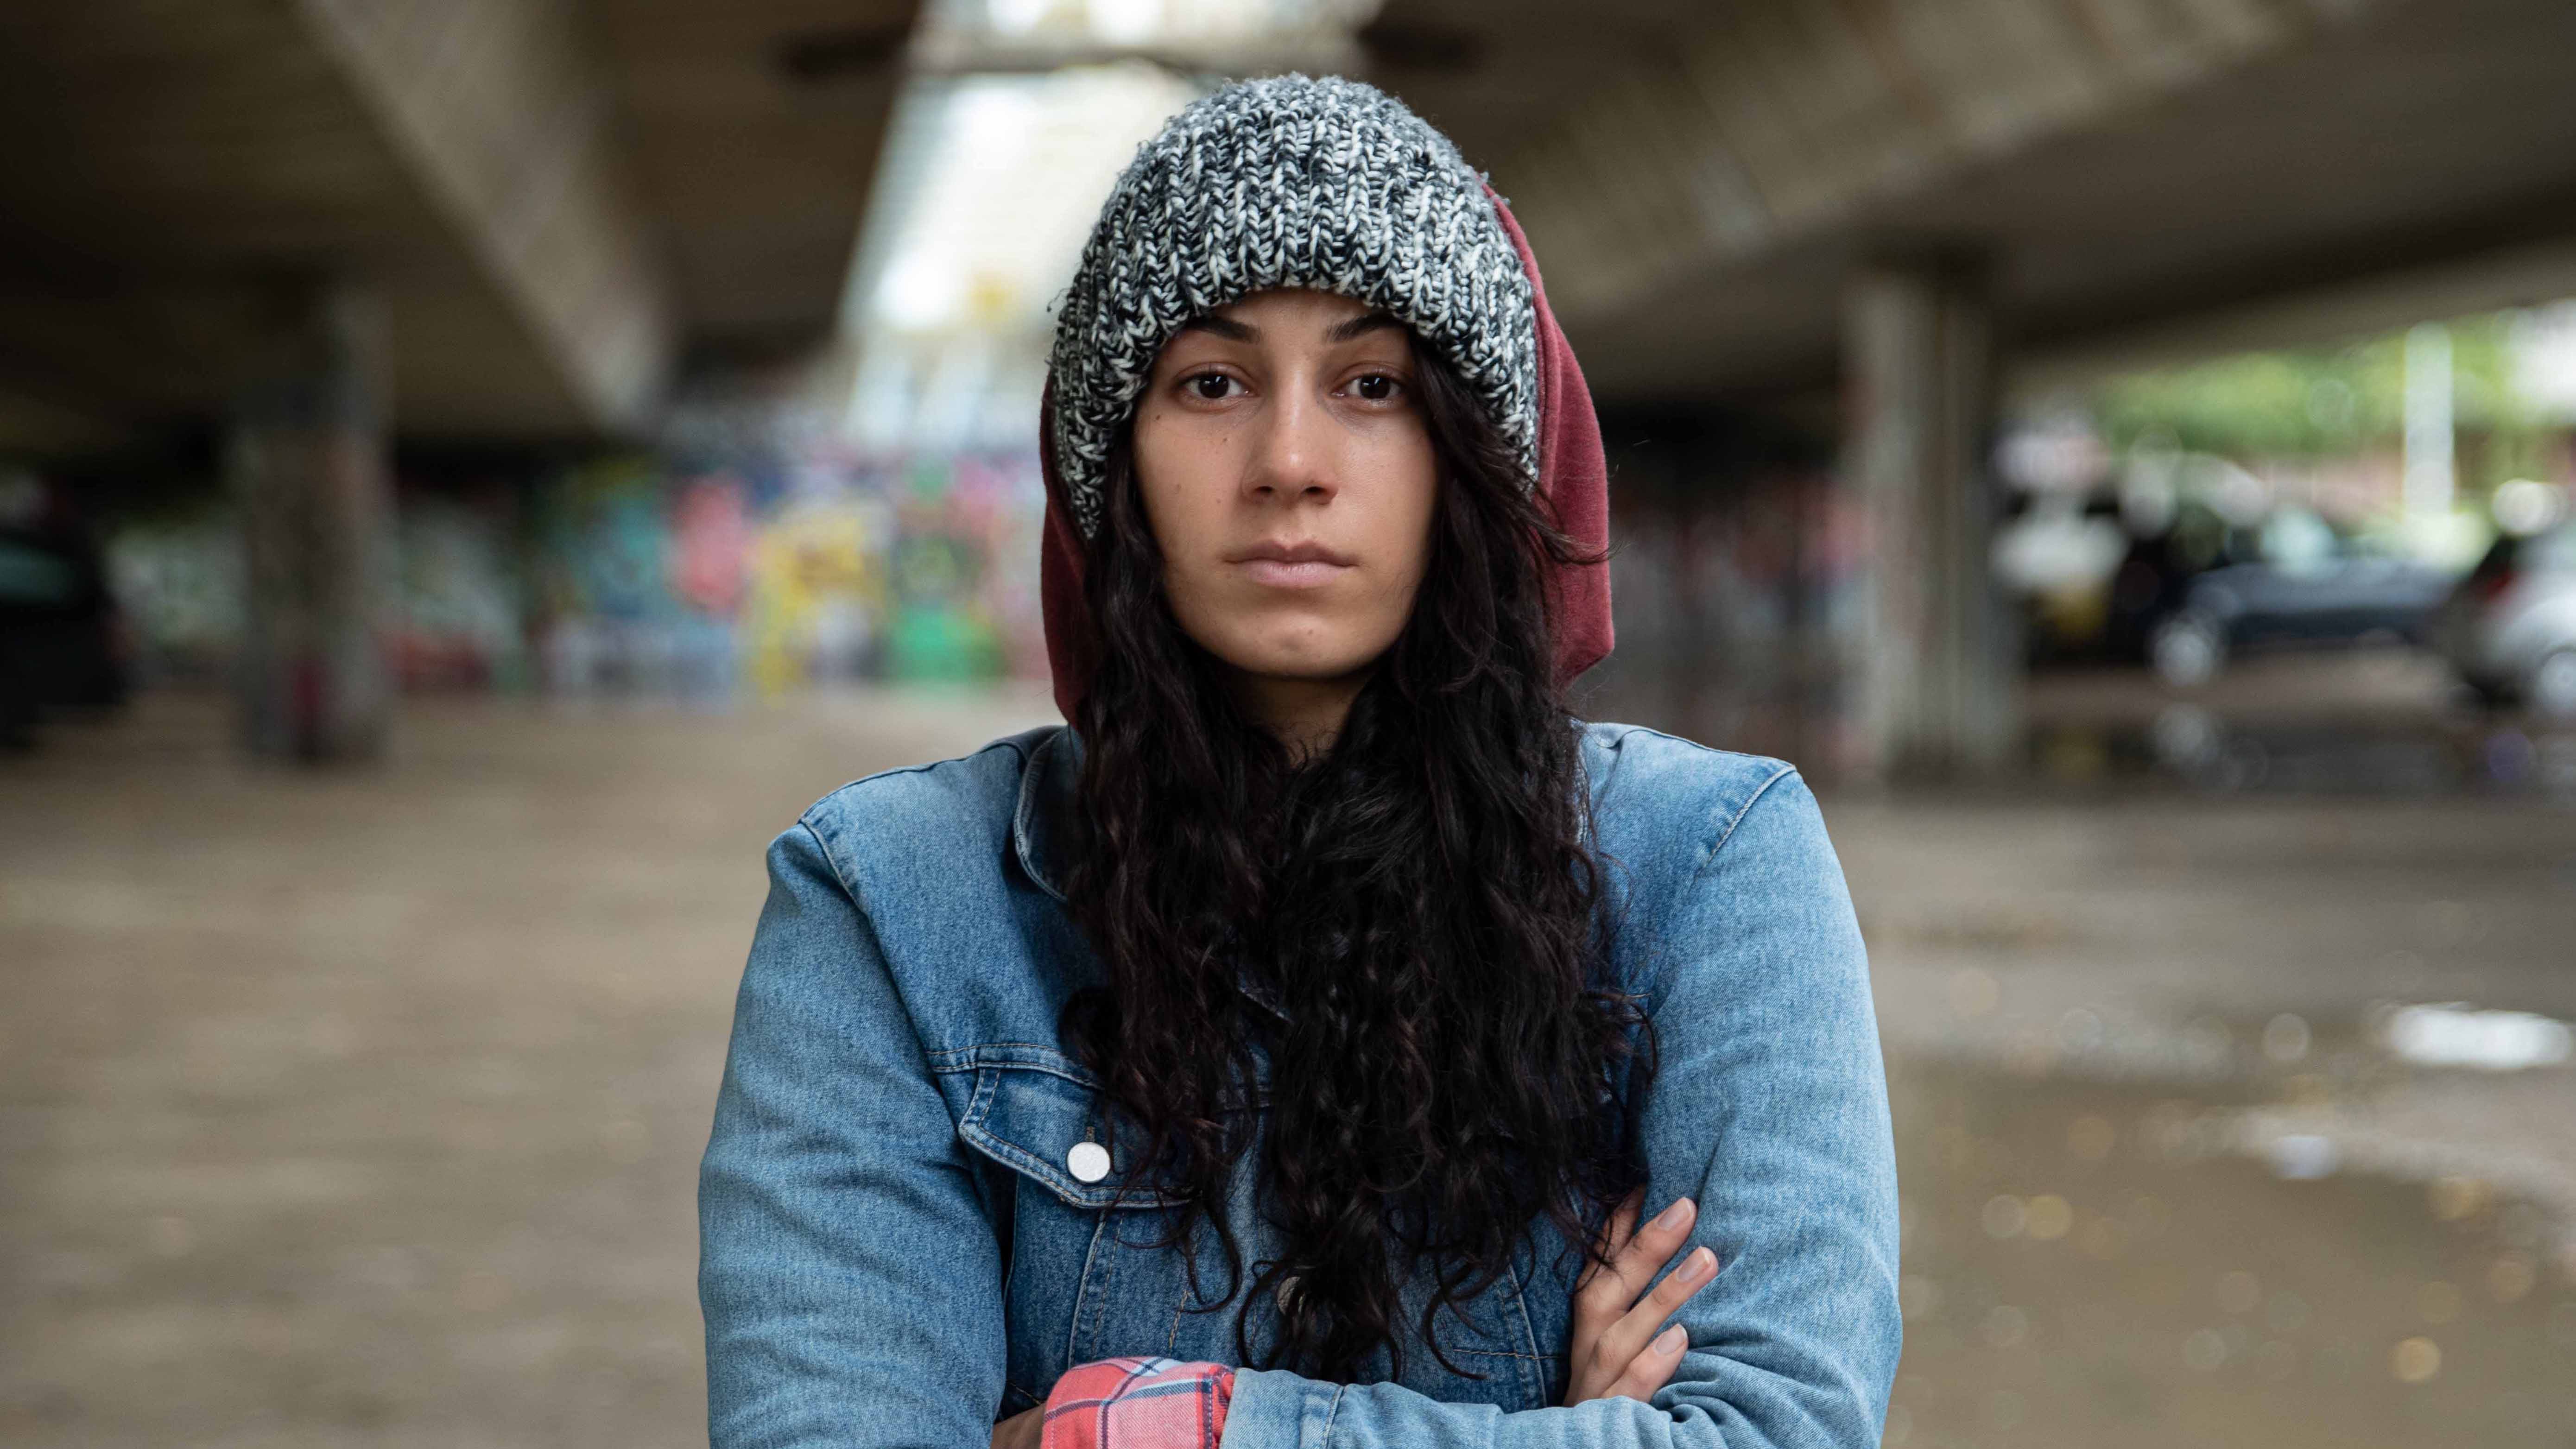 young woman on street with hood up and arms crossed